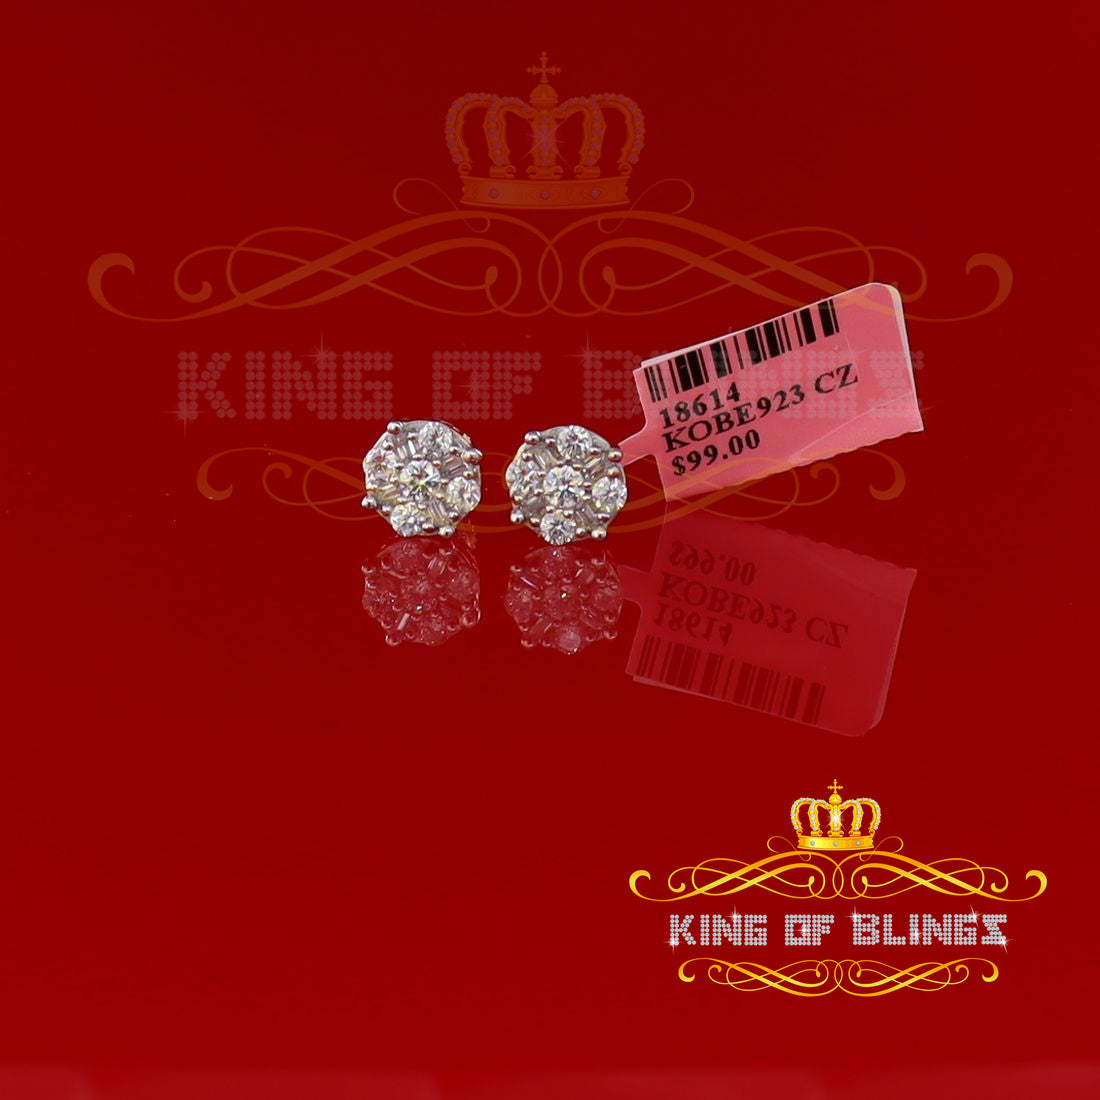 King of Bling's 925 Yellow 1.96ct Sterling Silver Cubic Zirconia Women's Hip Hop Round Earrings KING OF BLINGS